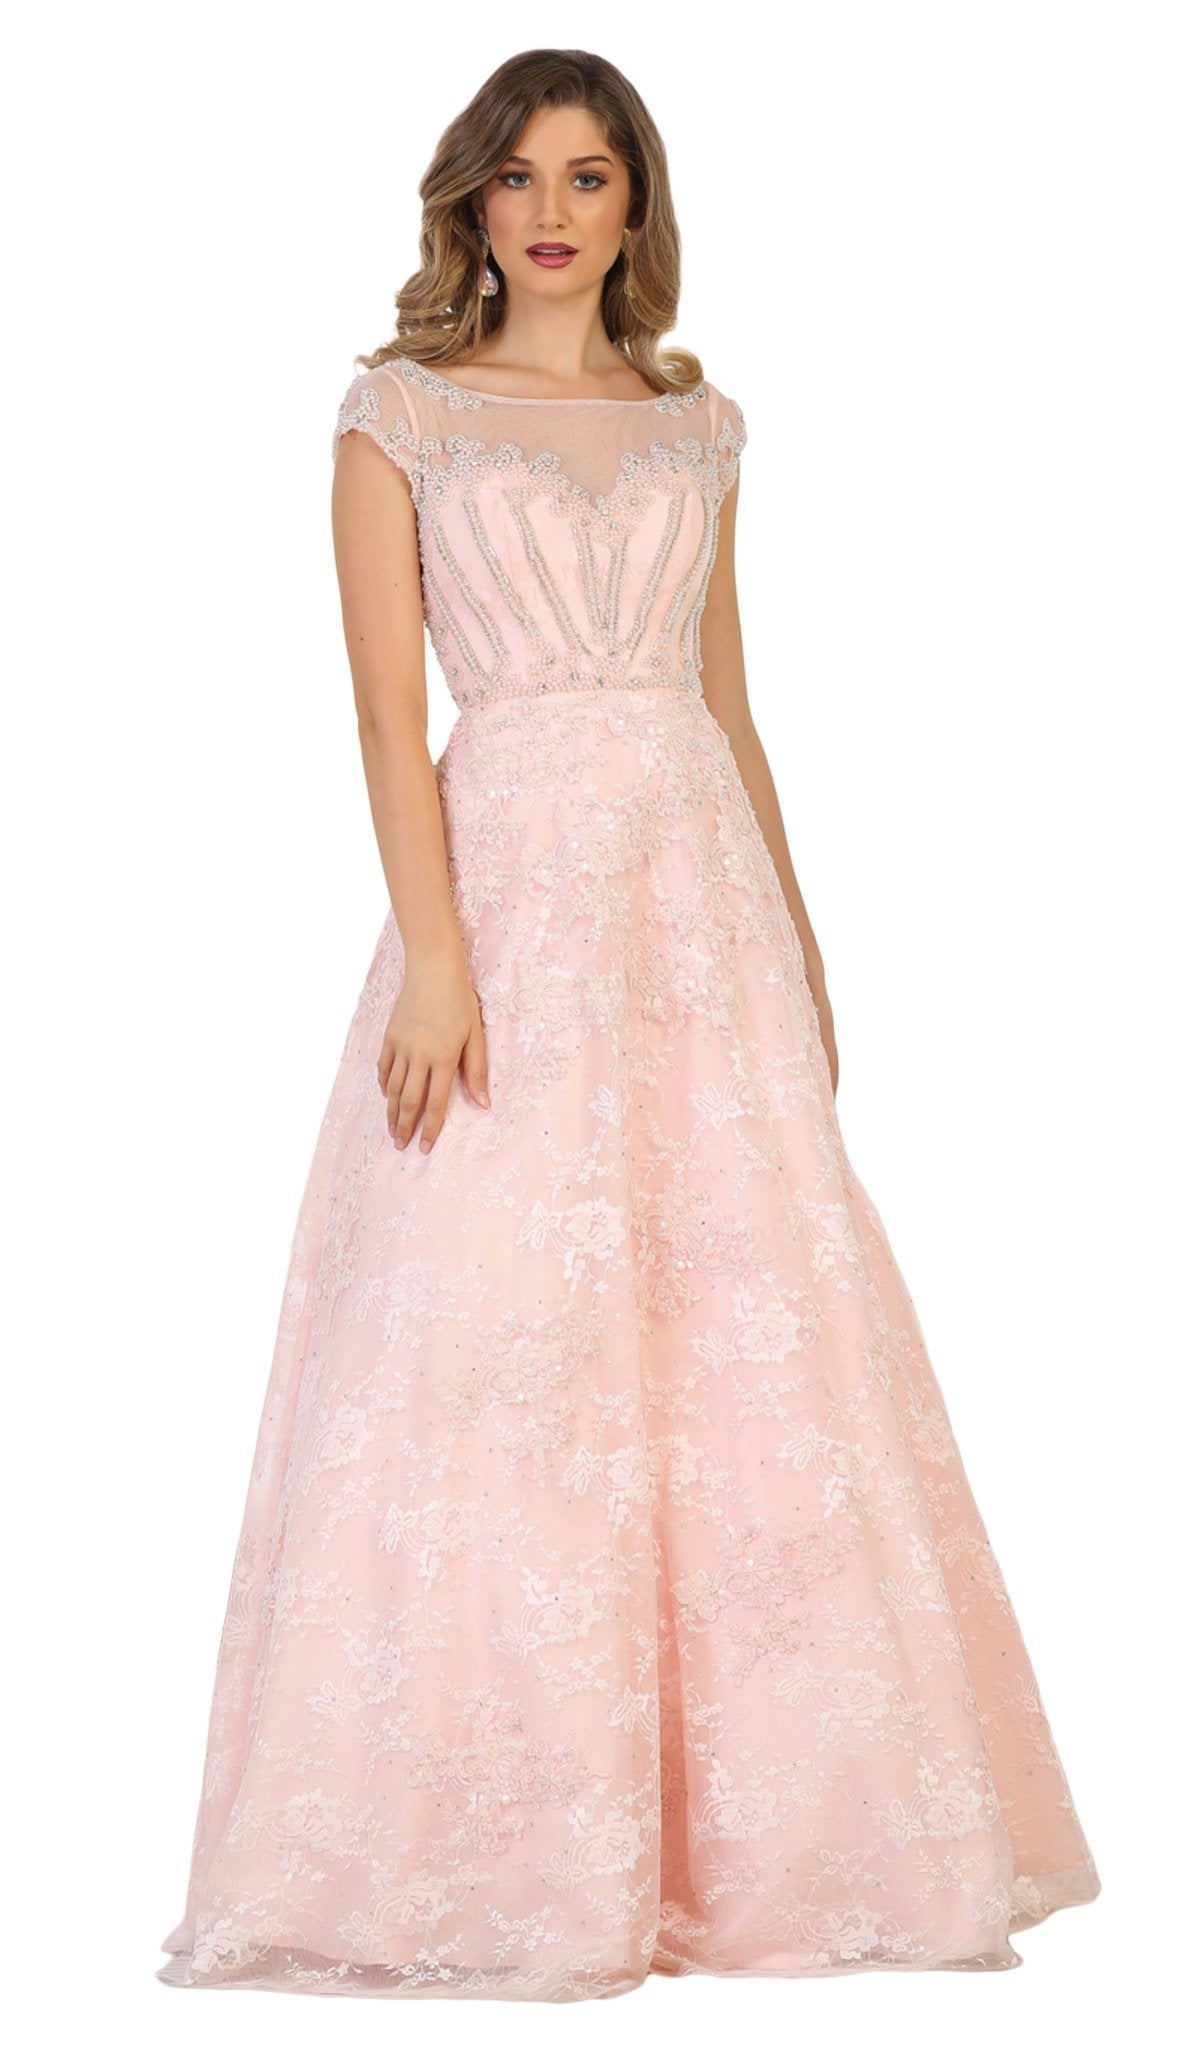 May Queen - RQ7612 Lace Applique Bateau A-line Dress In Pink